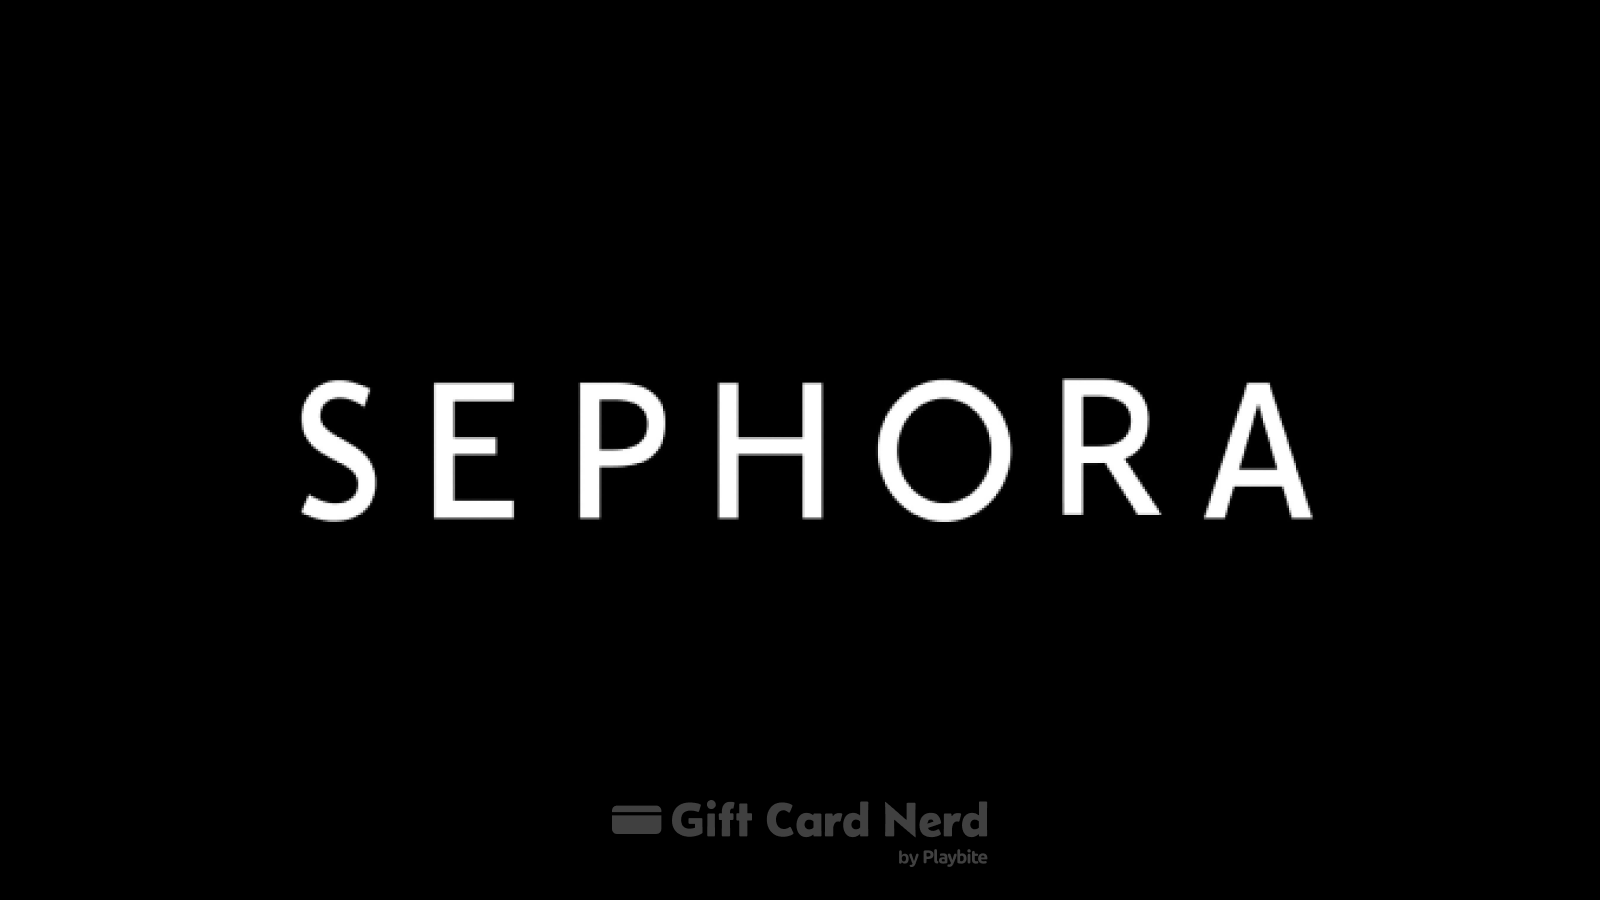 Can I Use a Sephora Gift Card on Apple Wallet?